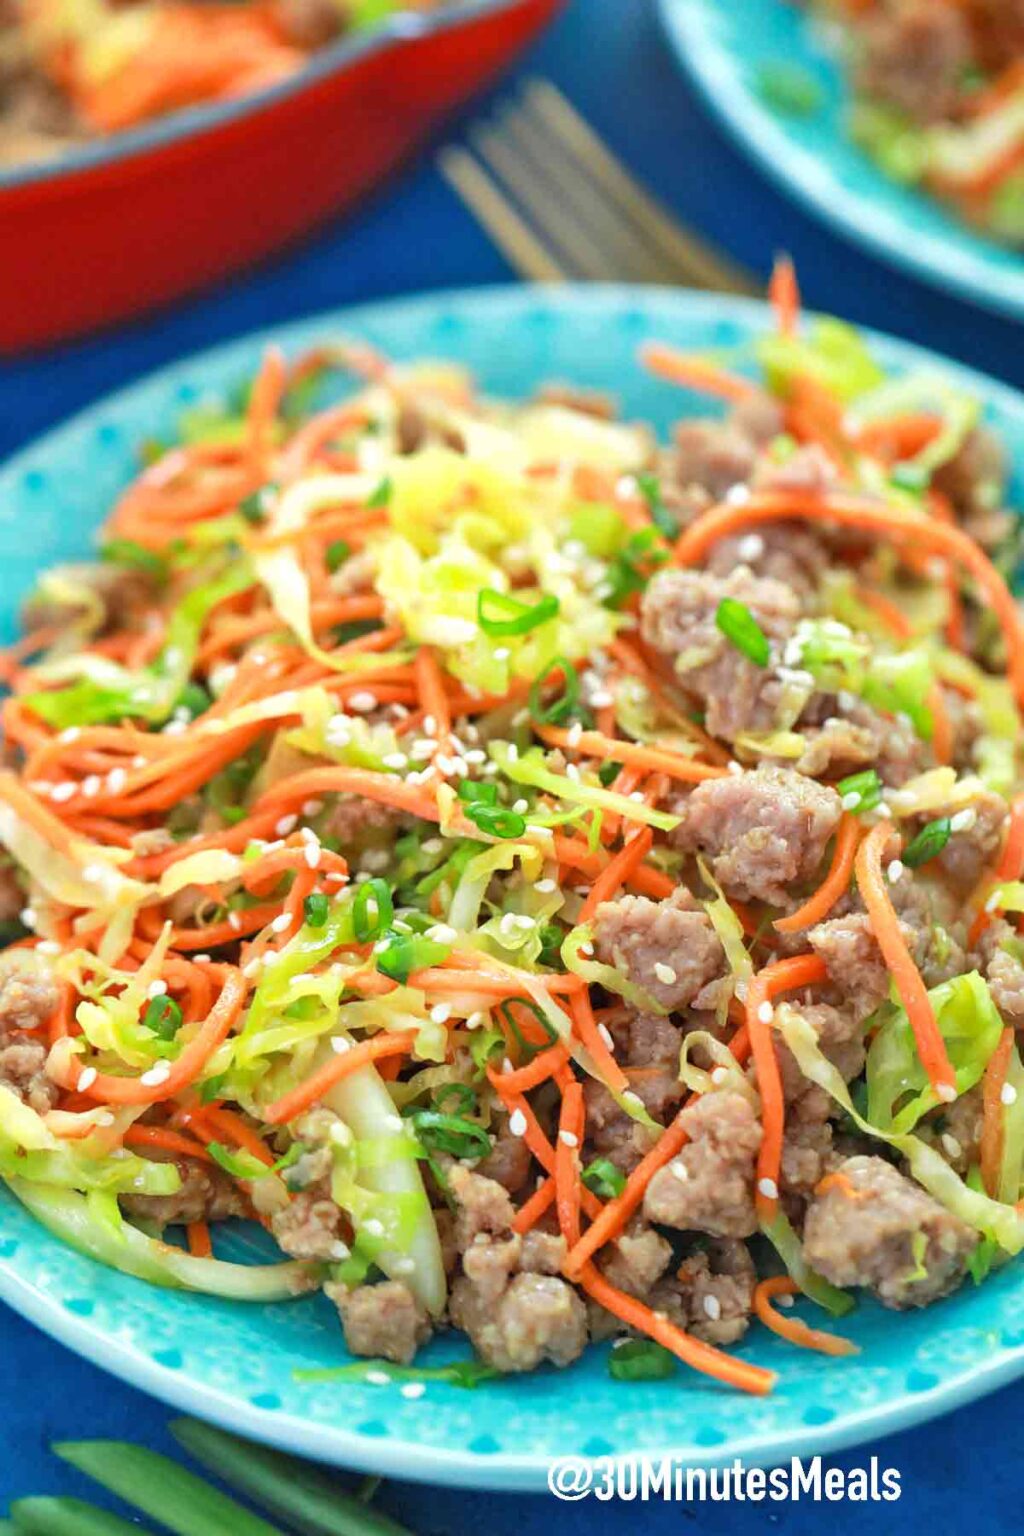 Egg Roll in a Bowl - 30 minutes meals